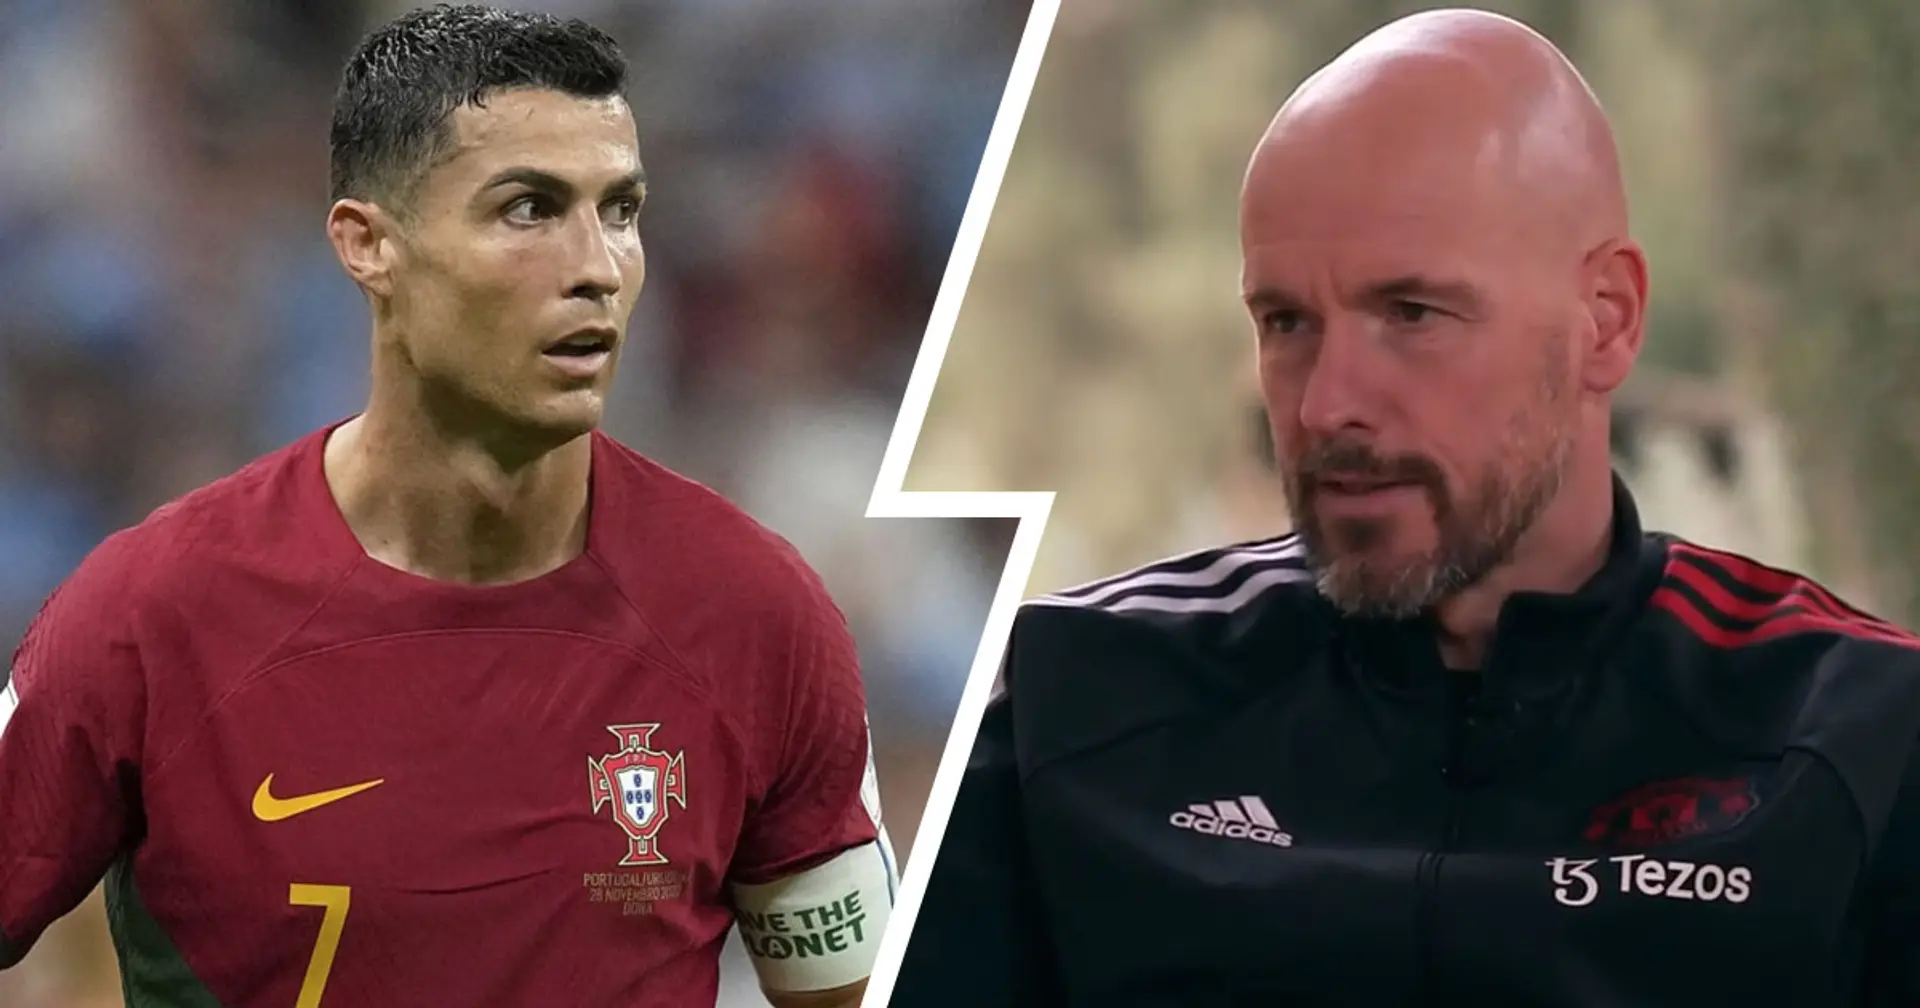 'He's gone and it's the past': Ten Hag opens up on Ronaldo's departure from United